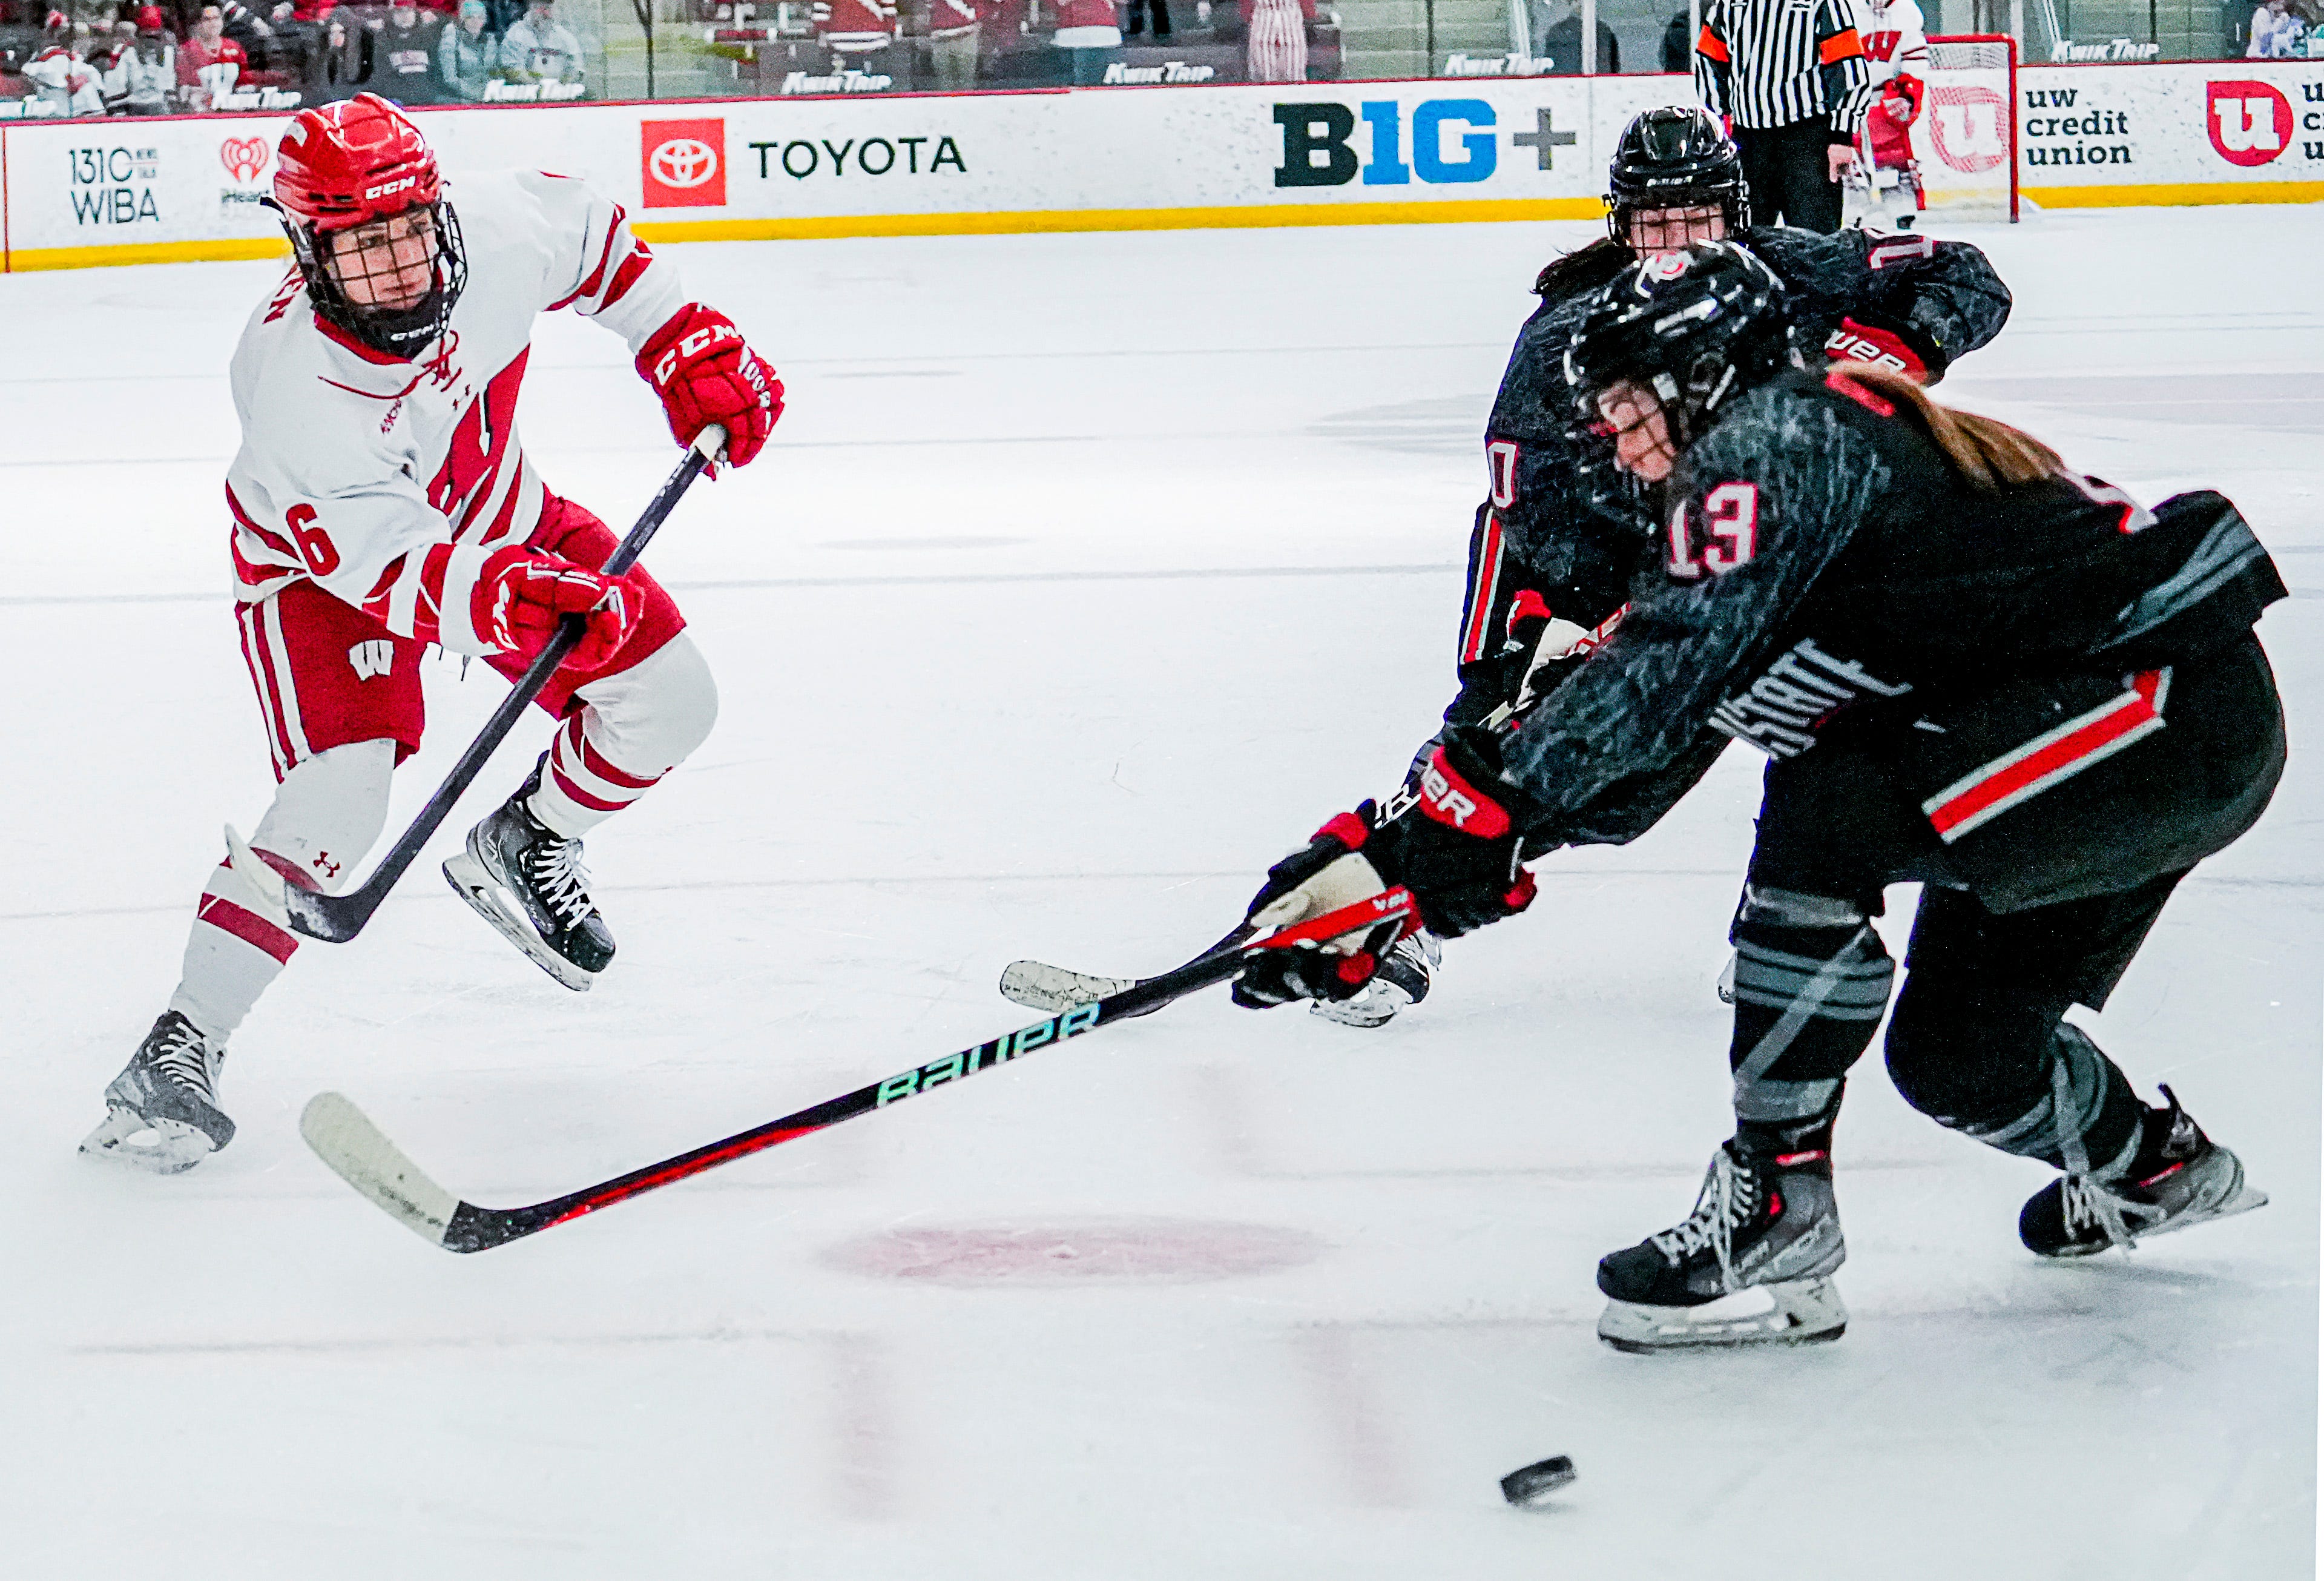 Wisconsin forward Lacey Eden (6) sends a shot toward the goal during the first period of a game against Ohio State on Saturday February 18, 2023 at LaBahn Arena in Madison, Wis.